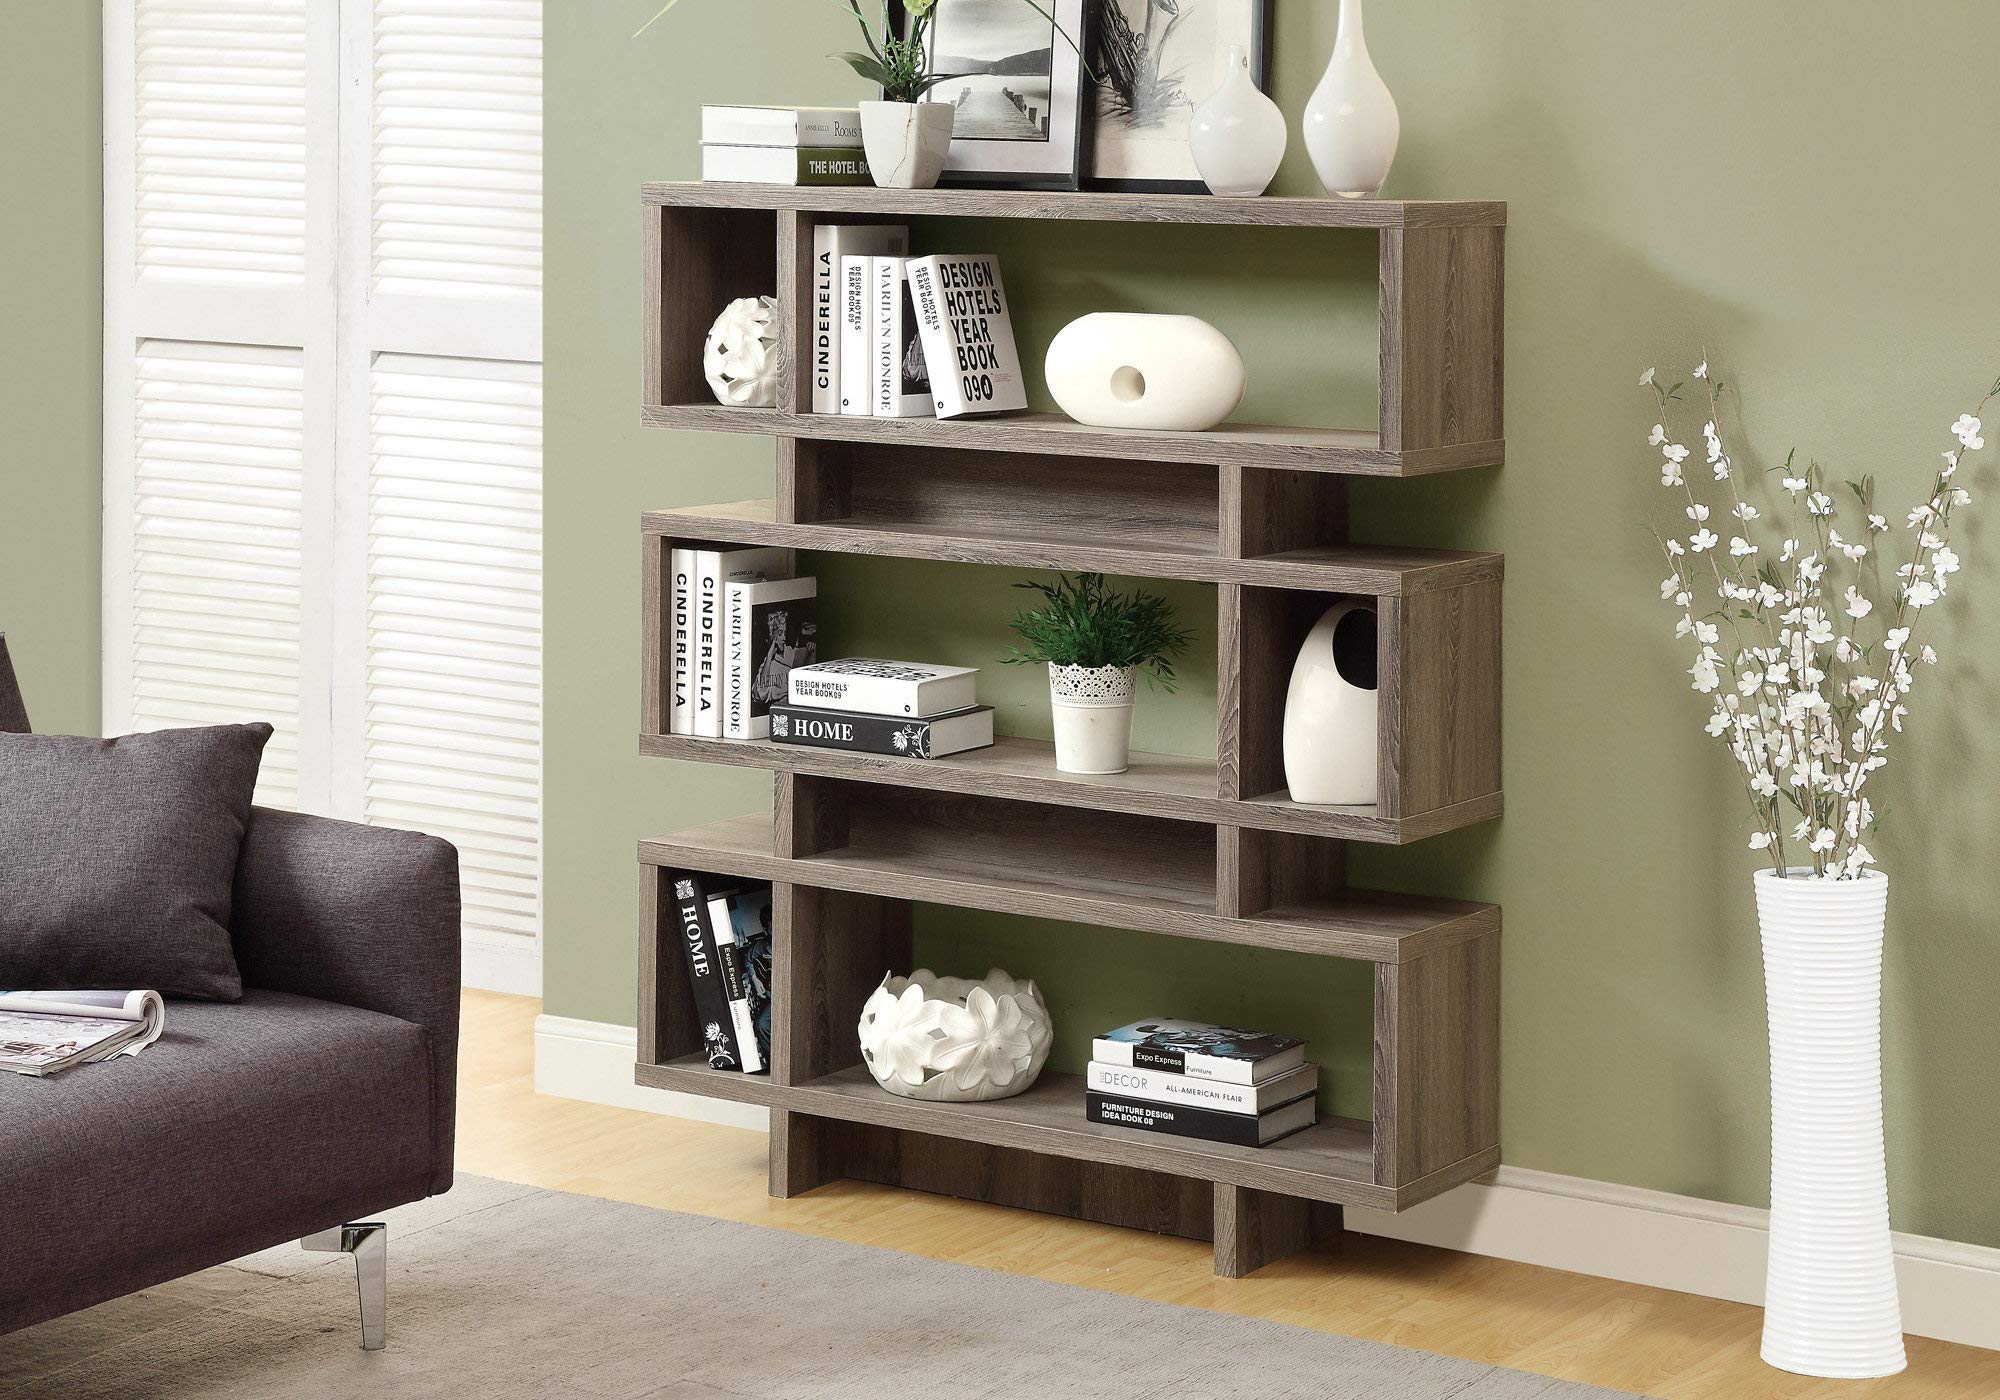 Monarch Specialties 3251 Bookshelf, Bookcase, Etagere, 4 Tier, 55" H, Office, Bedroom, Laminate, Brown, Contemporary, Modern Bookcase-55 H/Dark Taupe Style, 47.25" L x 12" W x 54.75" H